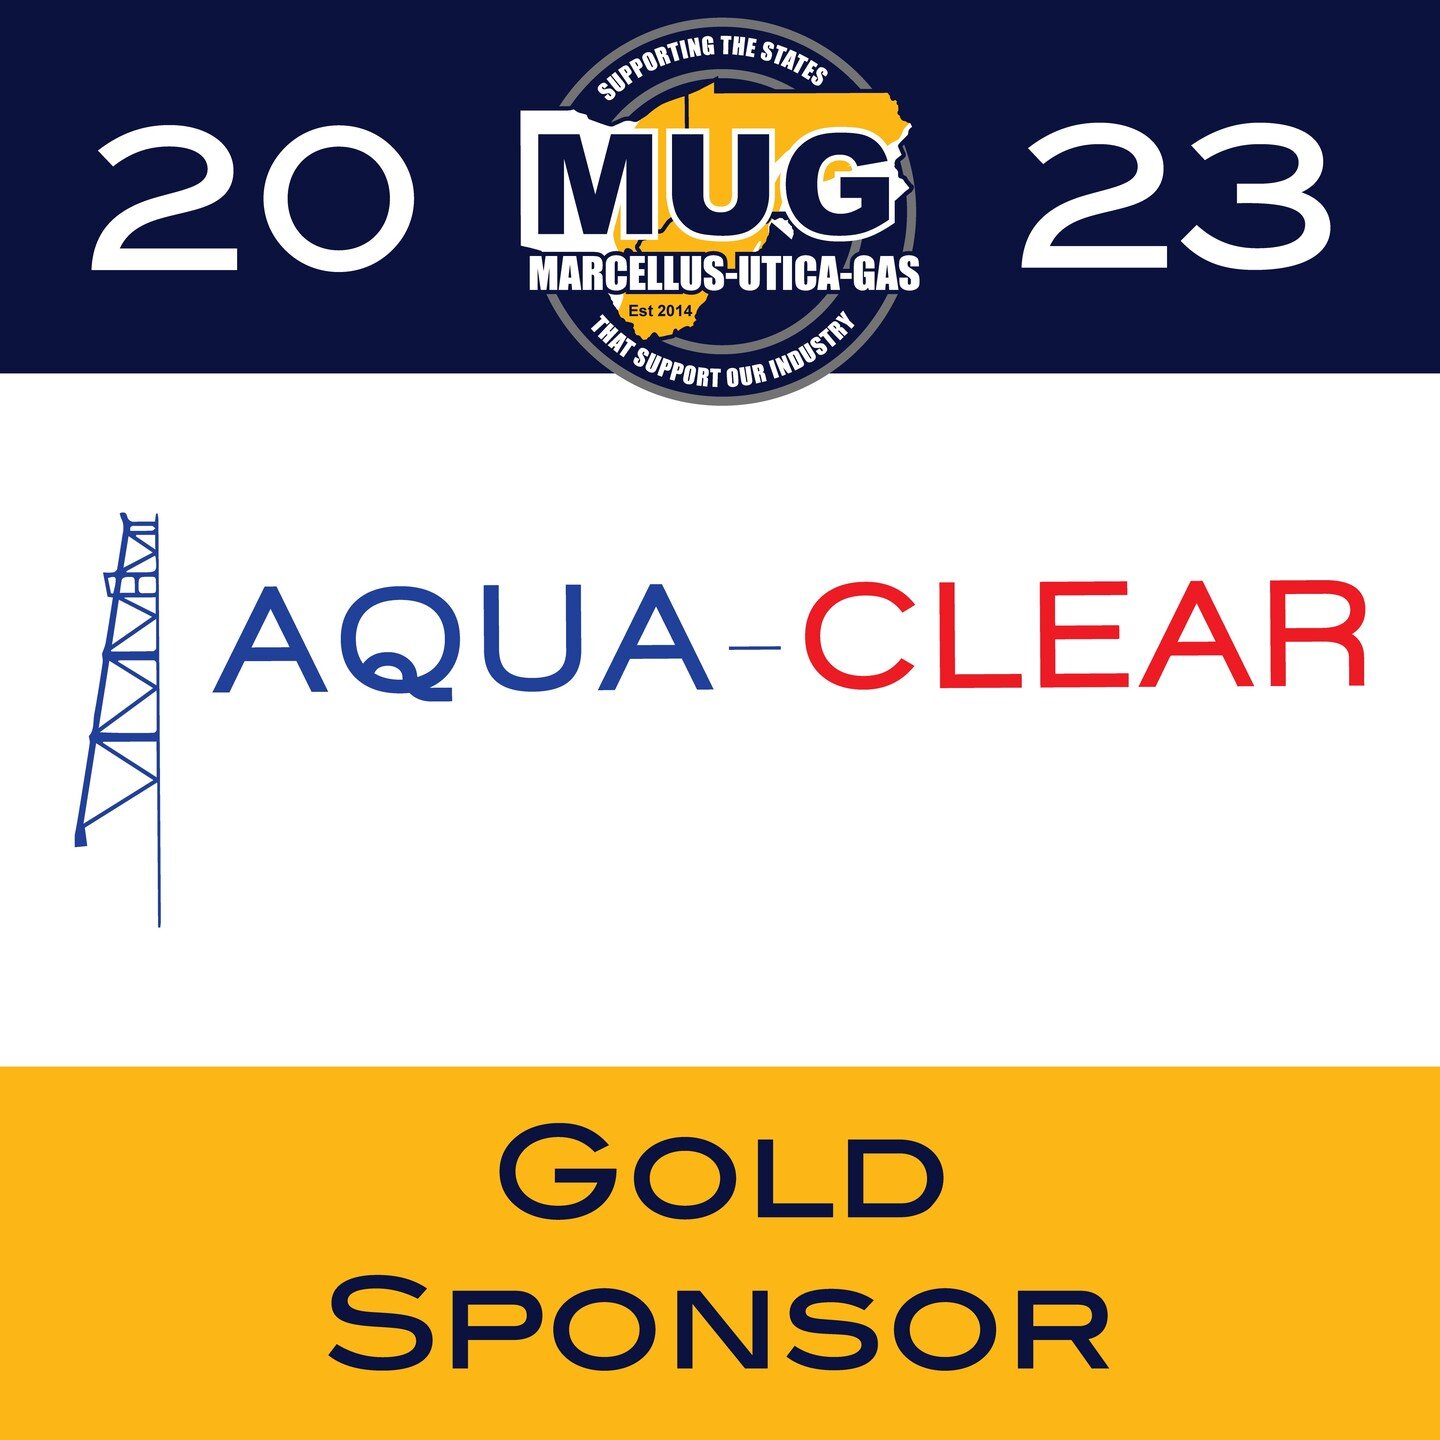 Thank you to our Gold Sponsor, Aqua Clear, for your support in 2023!